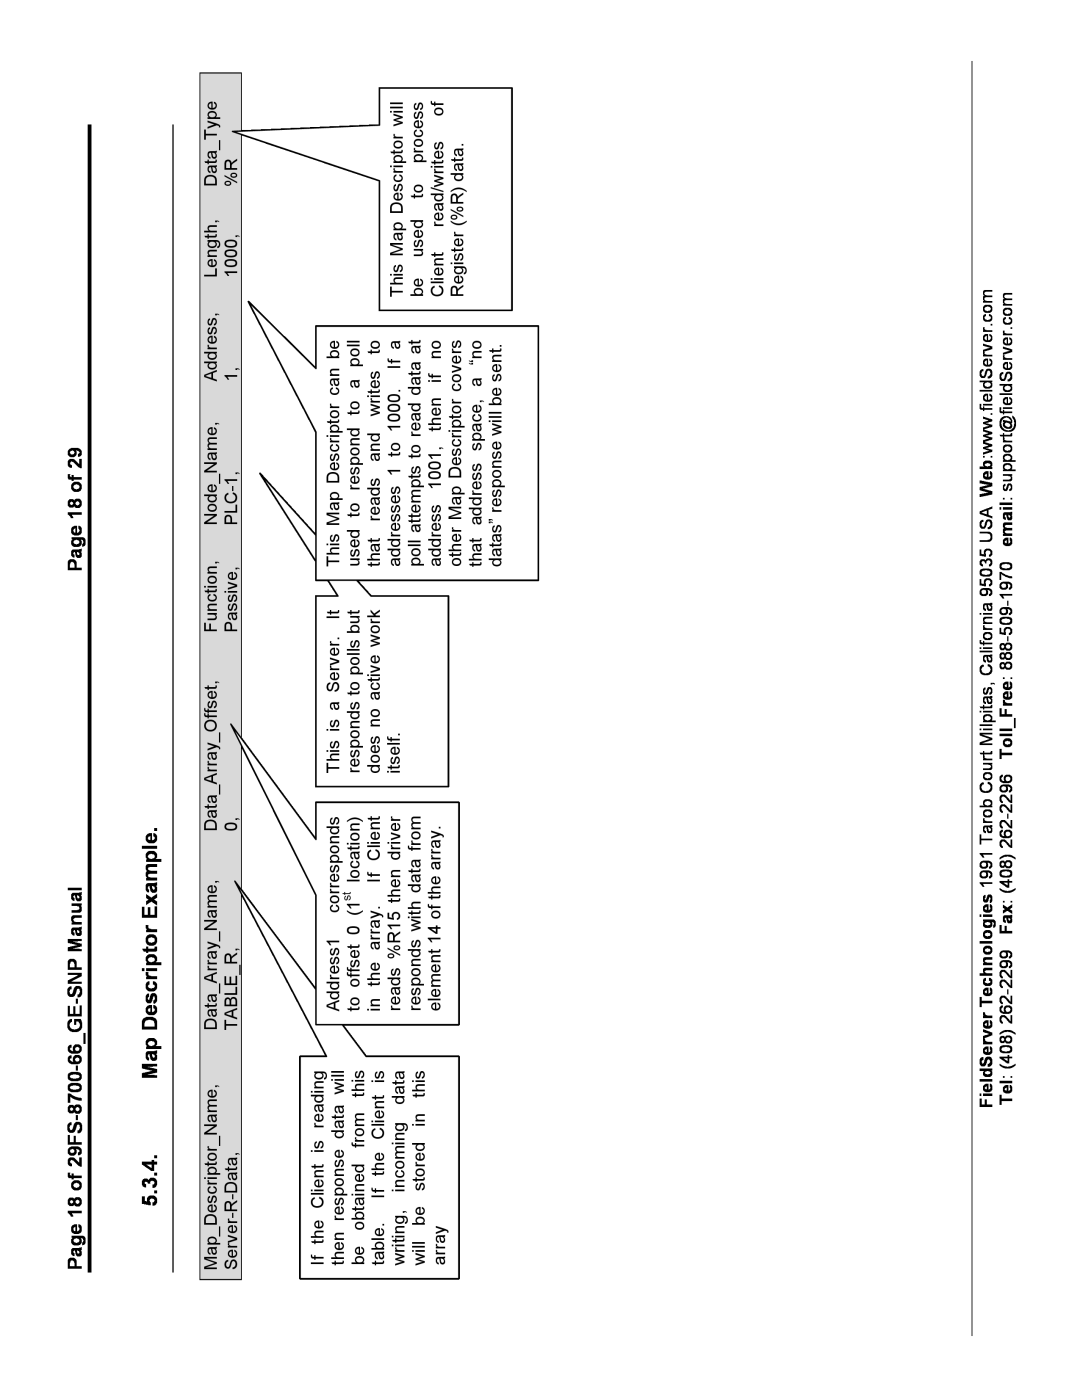 FieldServer instruction manual Map Descriptor Example, Page 18 of 29FS-8700-66GE-SNP Manual 